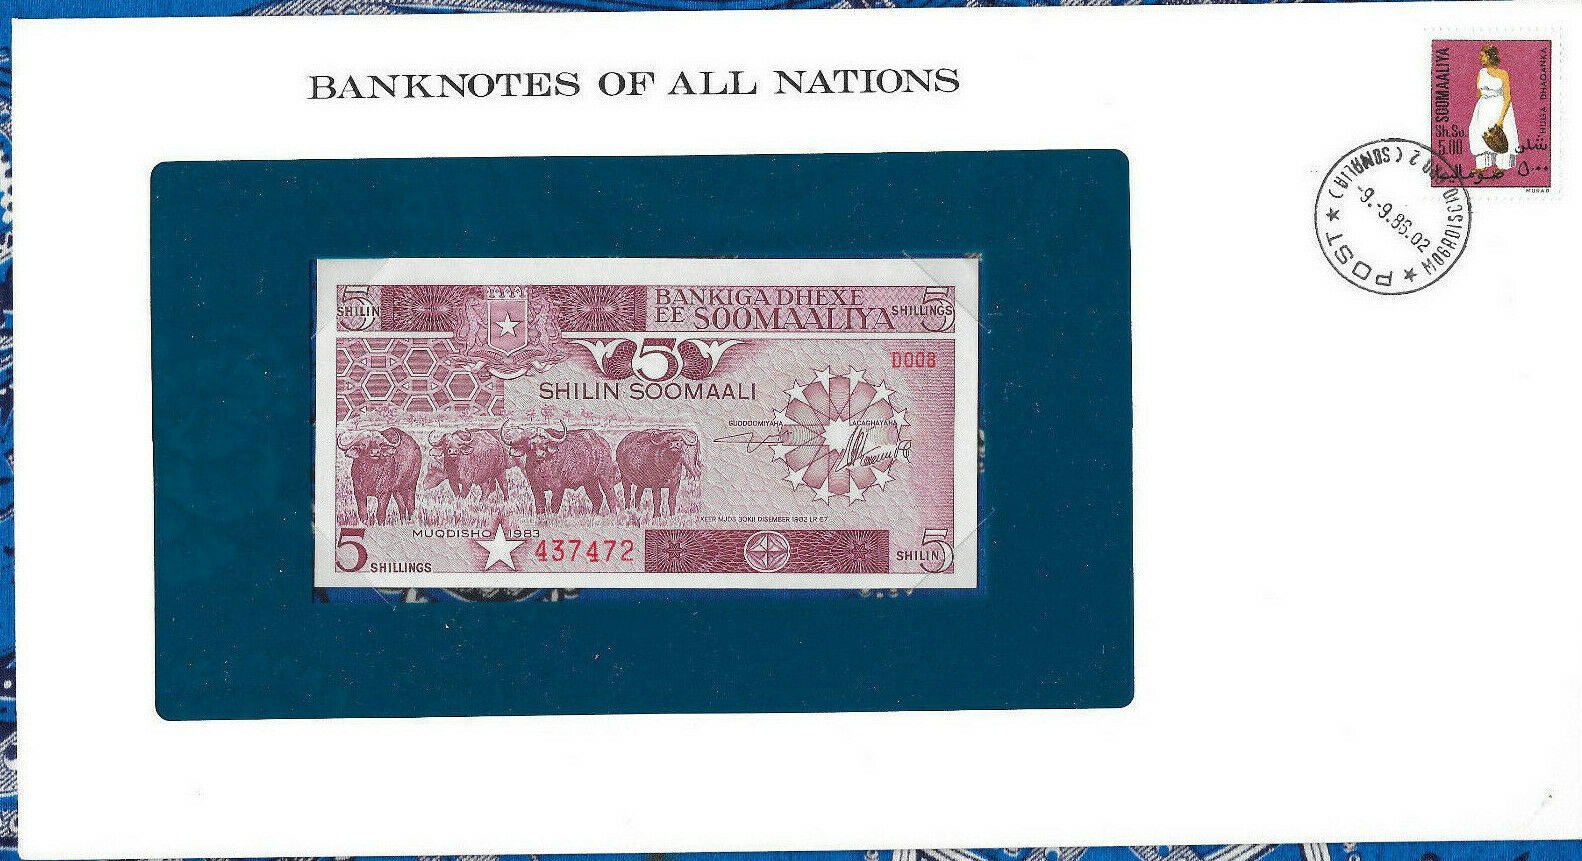 Banknotes Of All Nations Somalia 1983 5 Shillings P-31a Unc Serie D.008